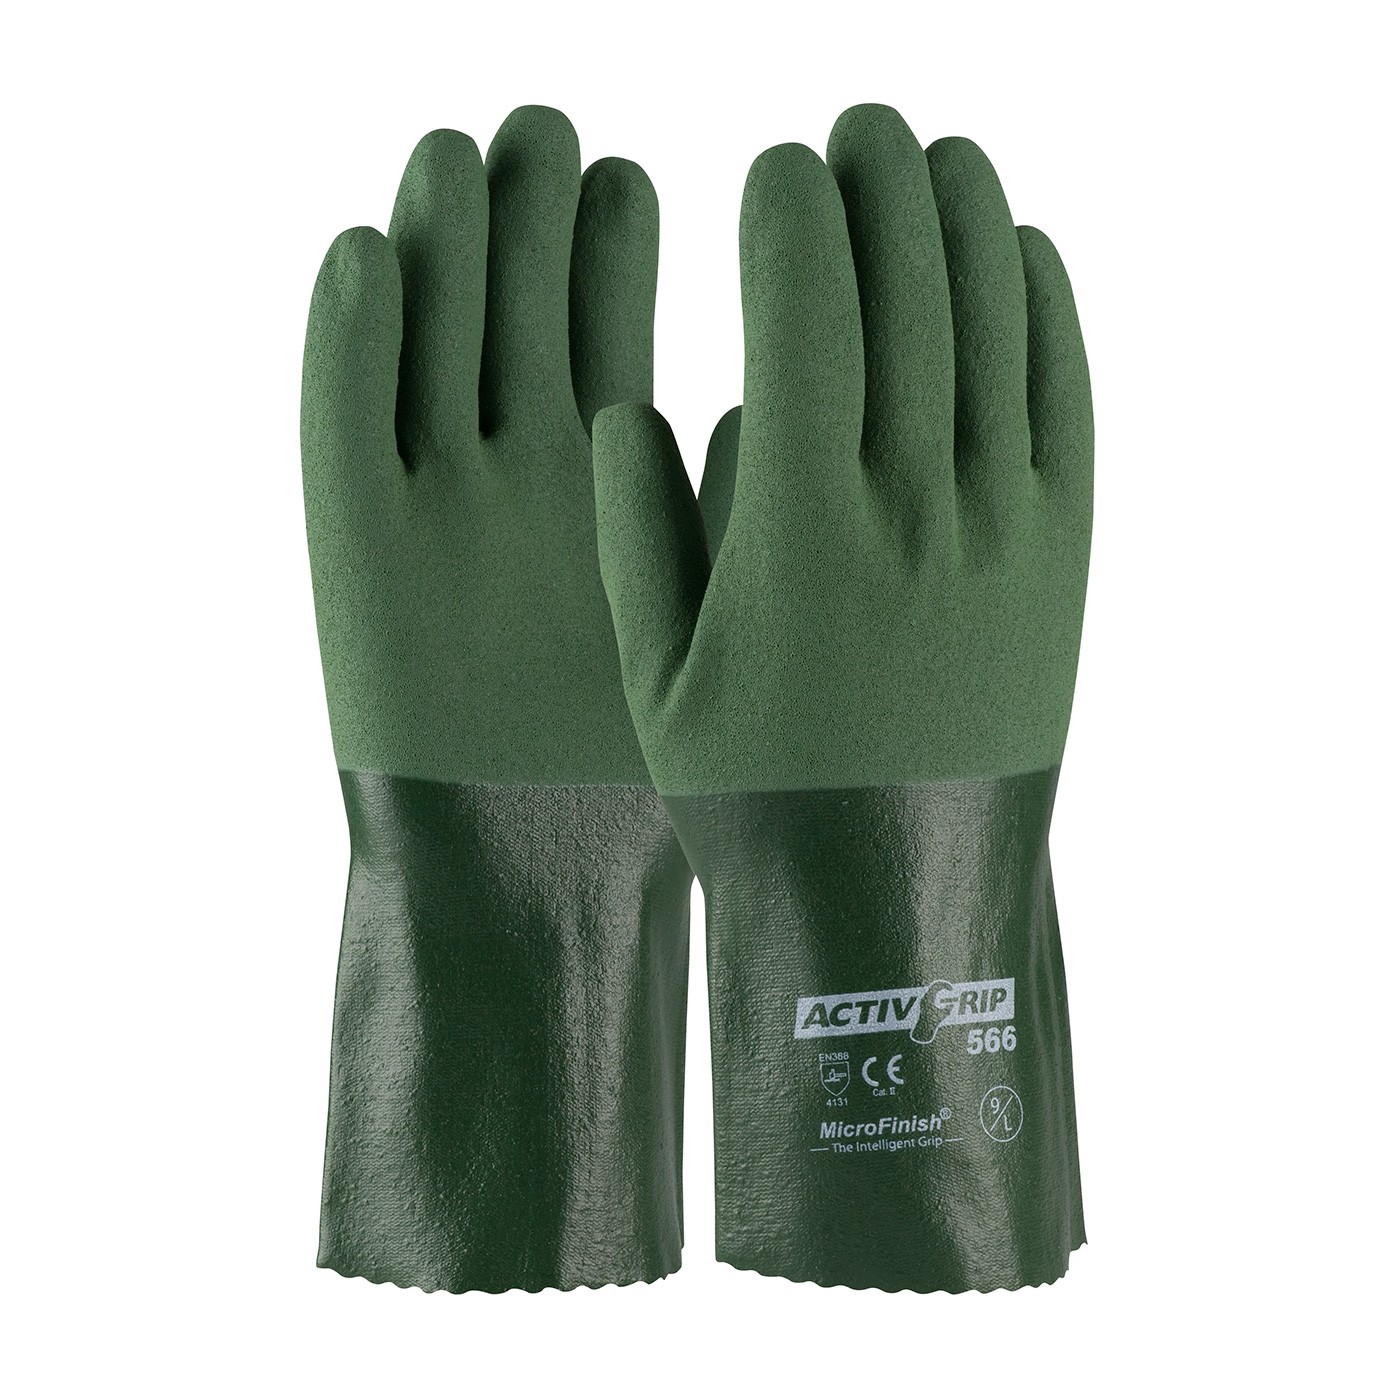 ActivGrip™ Nitrile Coated Glove with Cotton Liner and MicroFinish Grip - 12"  (#56-AG566)